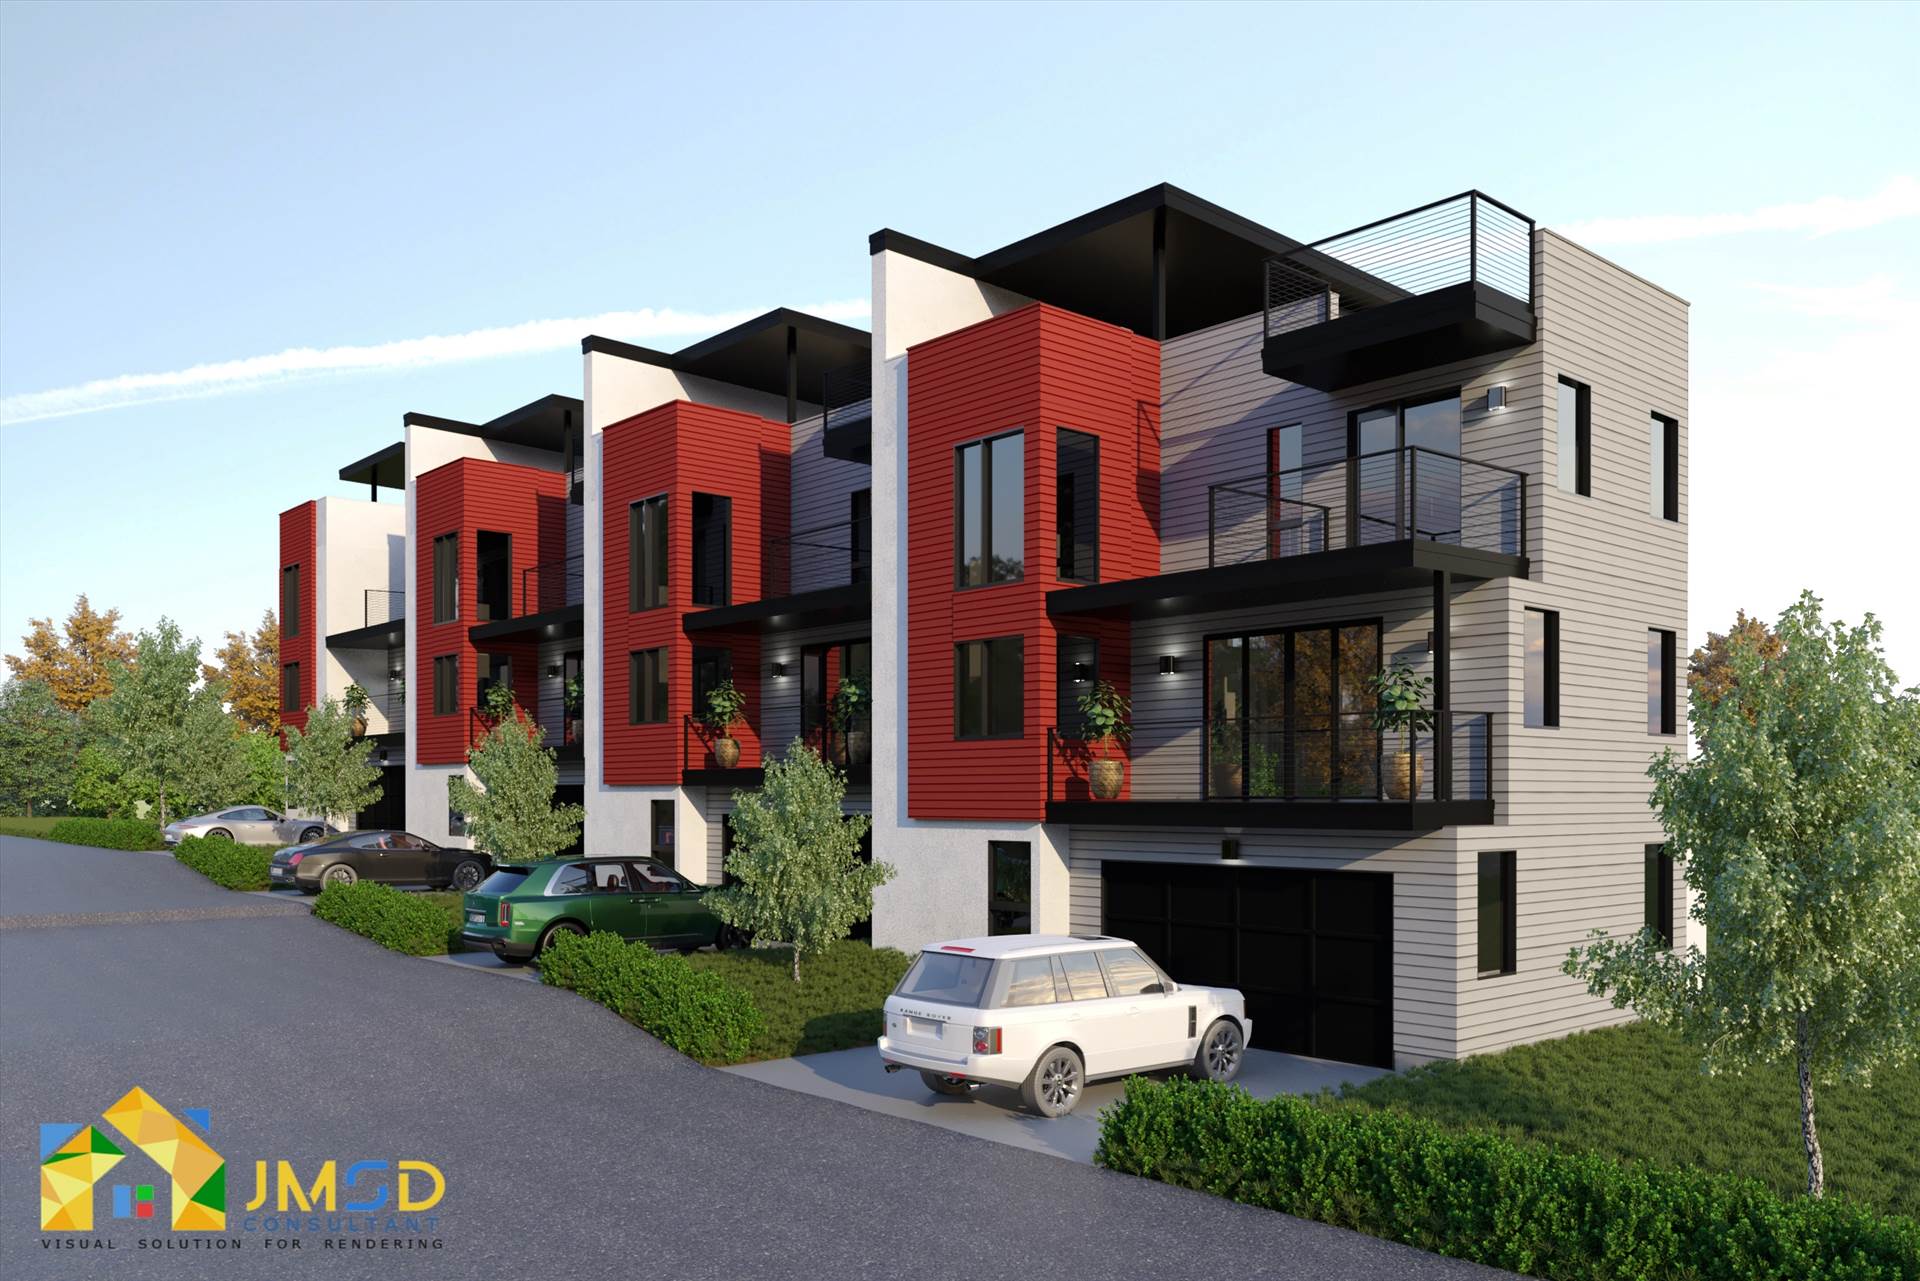 Street View Modern Bungalow Homes Rendering Denver Colorado Street View Modern Bungalow Homes Rendering Denver Colorado. Several Modern Bungalow Homes with surrounding landscape, roads, cars and people.  by JMSDCONSULTANT